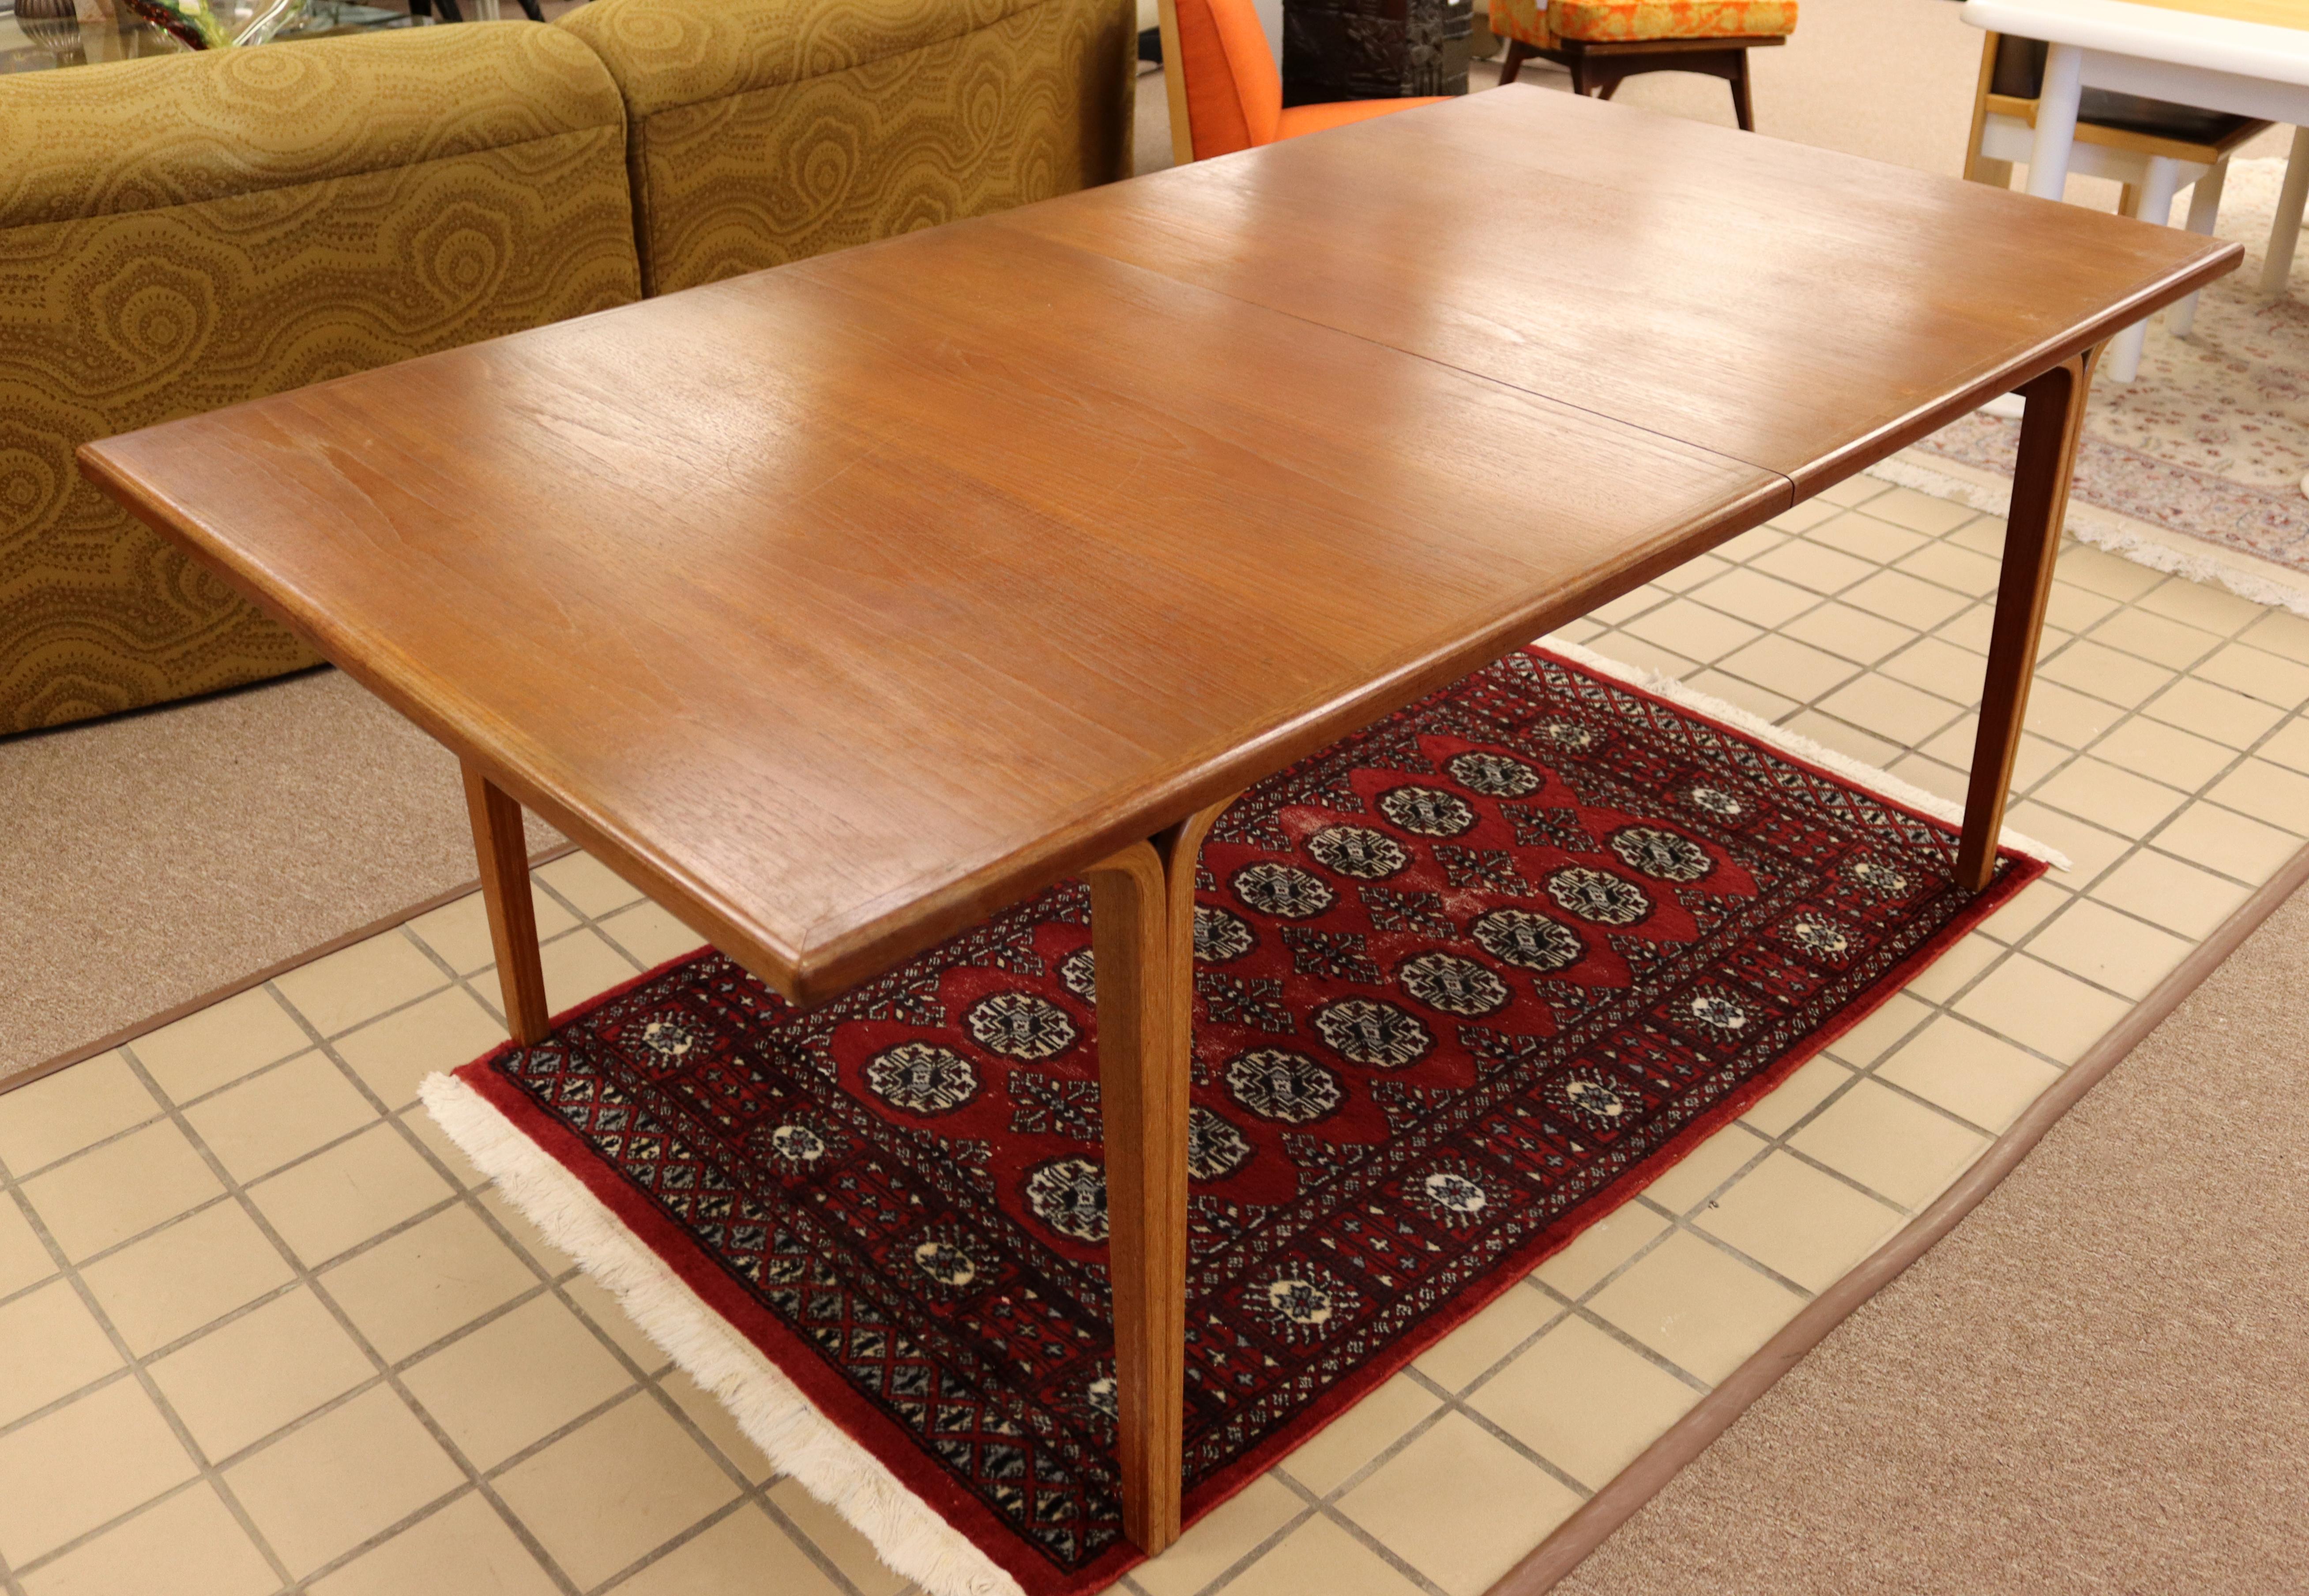 For your consideration is an exemplary, expandable dining table Bill Stephens for Knoll, with two leaves, circa the 1960s. In excellent vintage condition. The dimensions of the table are 76